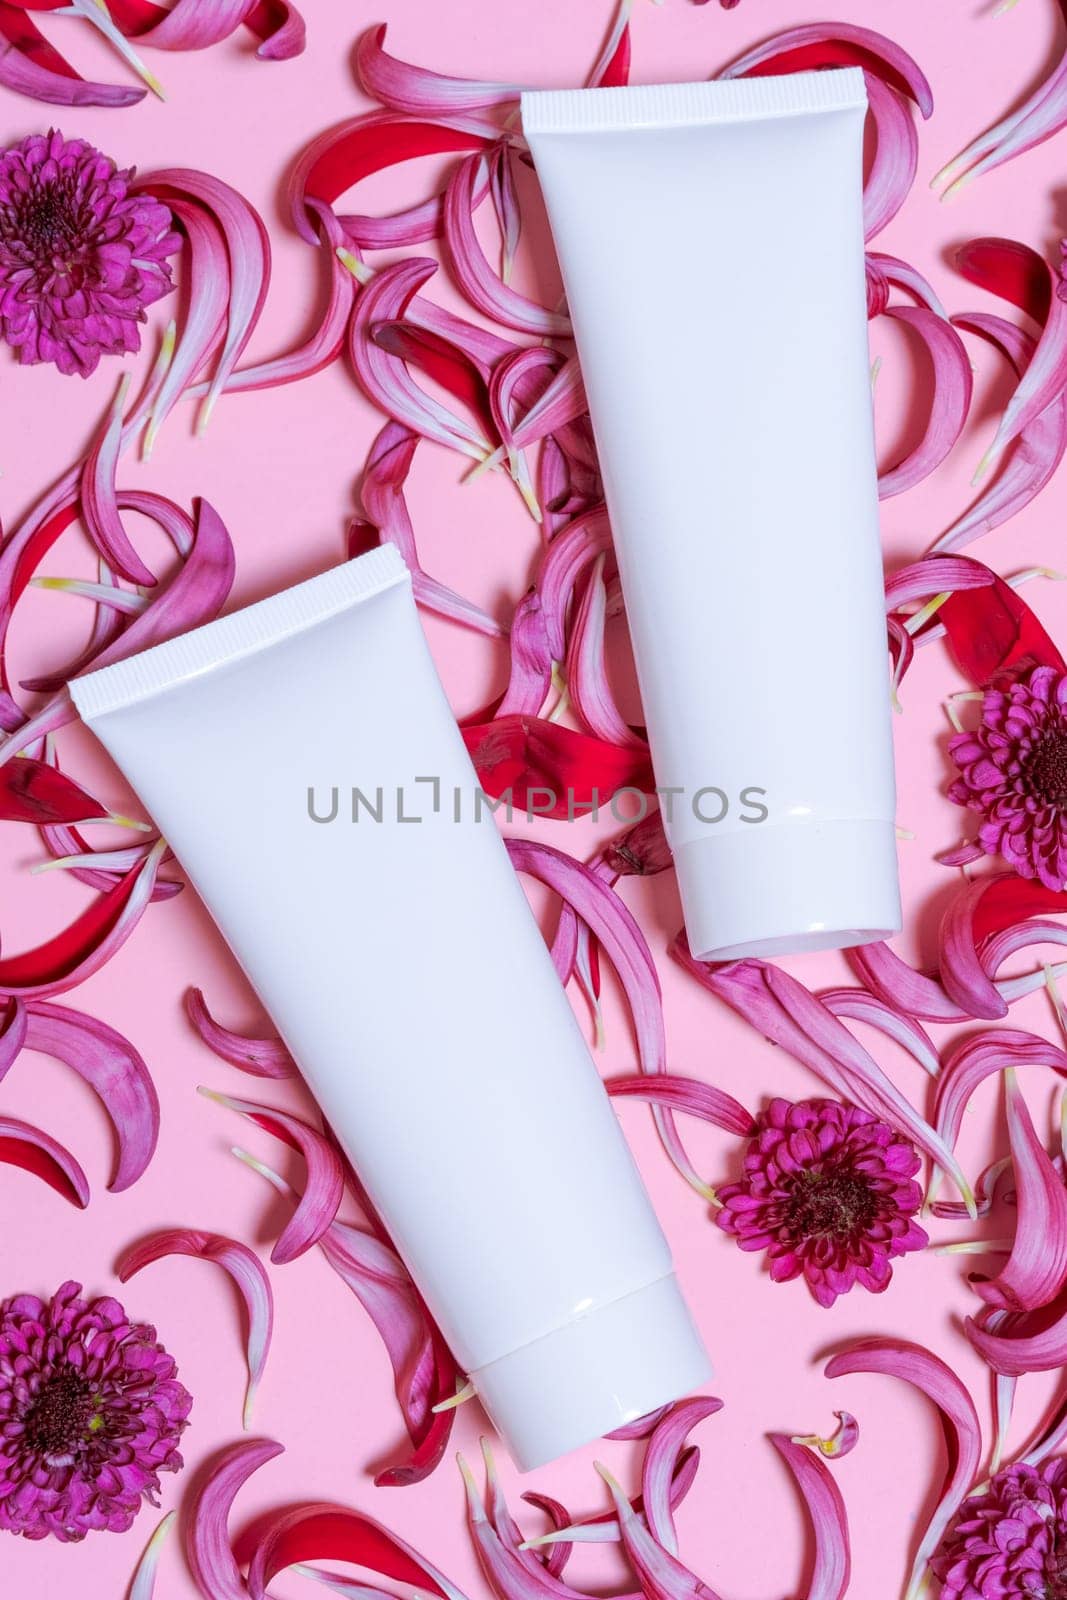 Natural cosmetic products with white bottles and fresh flowers on pink background, Beauty and skin, hair or body care concept, space for mockup